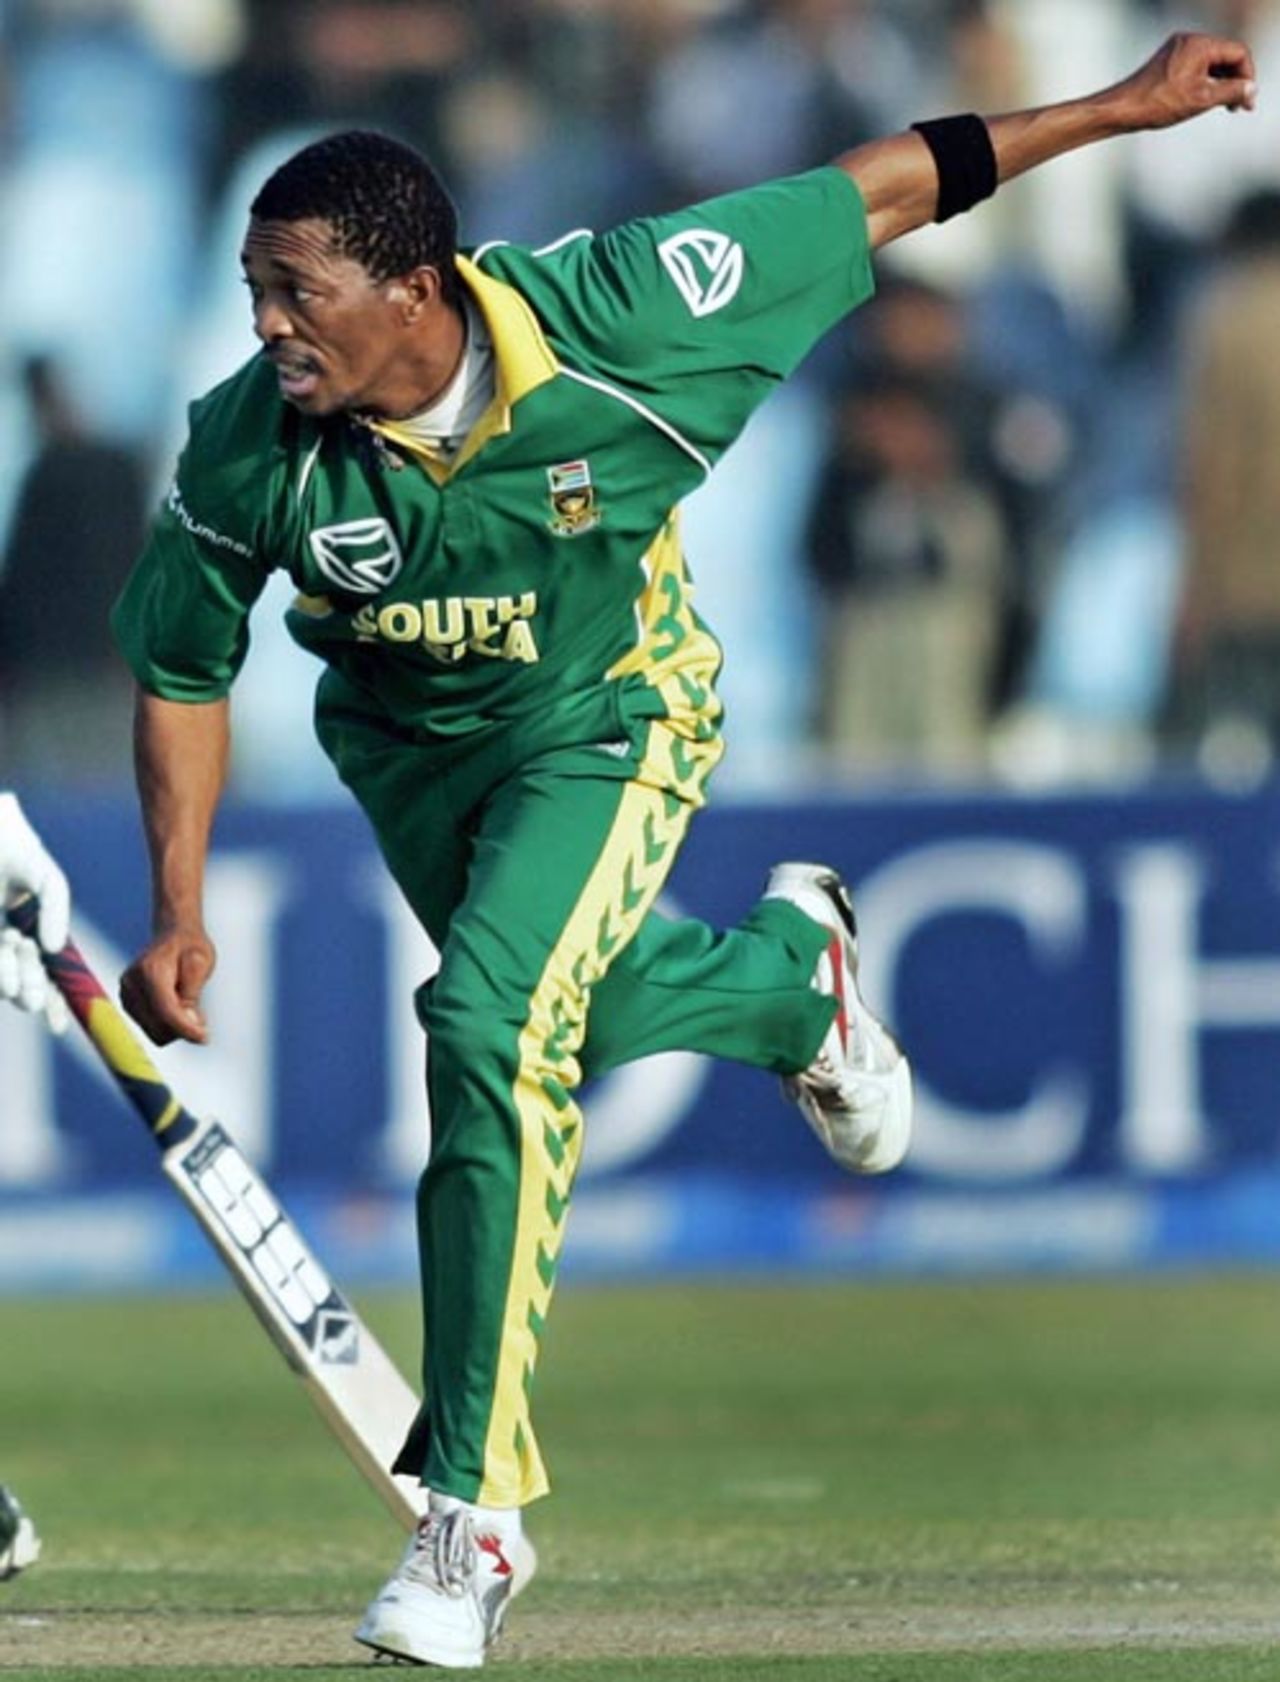 Makhaya Ntini was awarded the Man of the Match for his four-wicket haul, Pakistan v South Africa, 5th ODI, Lahore, October 29, 2007